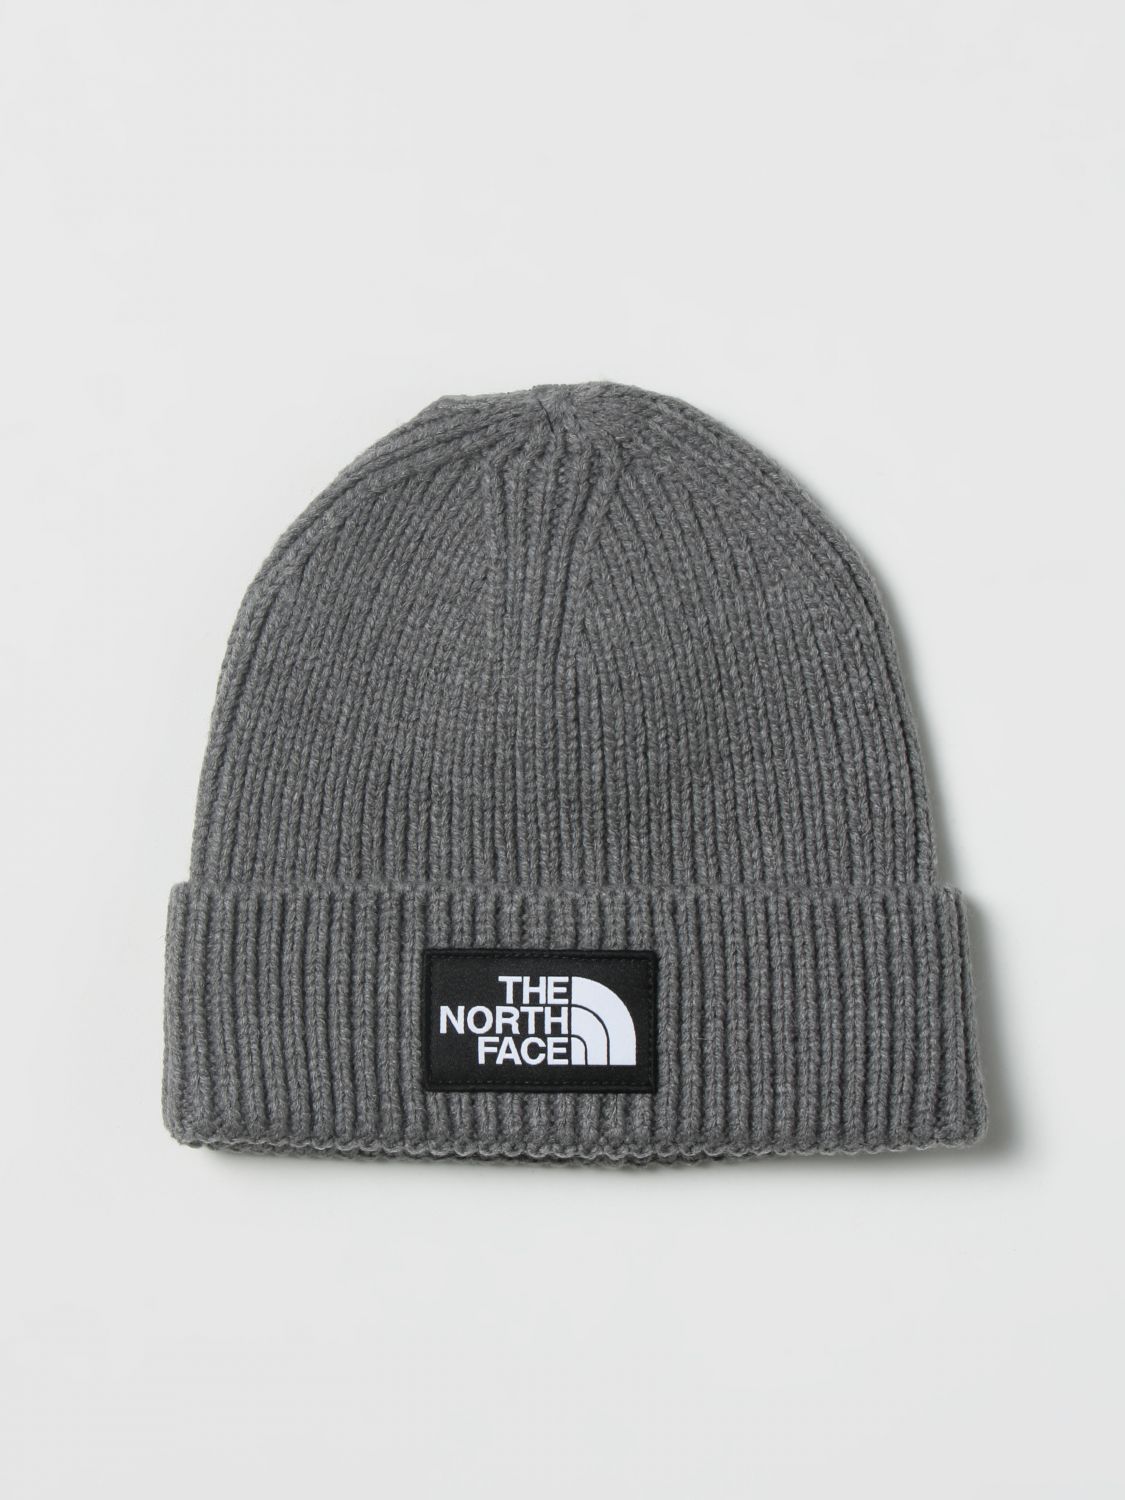 Hat The North Face: The North Face hat for man charcoal 1